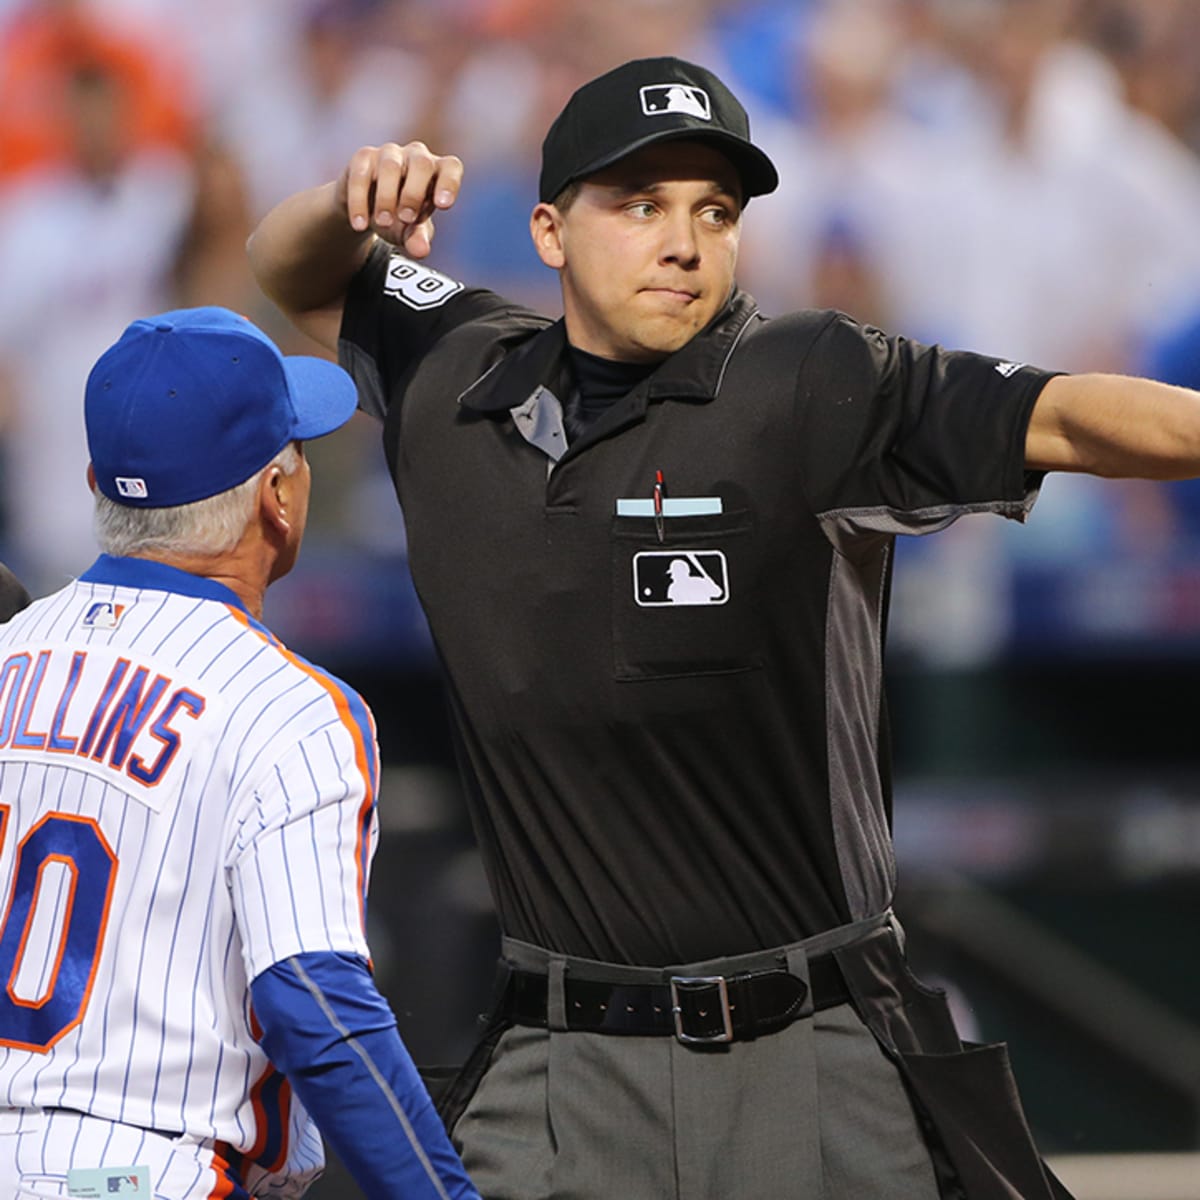 MLB Umpire Cusses On Hot Mic During Game, 'Oh S***!